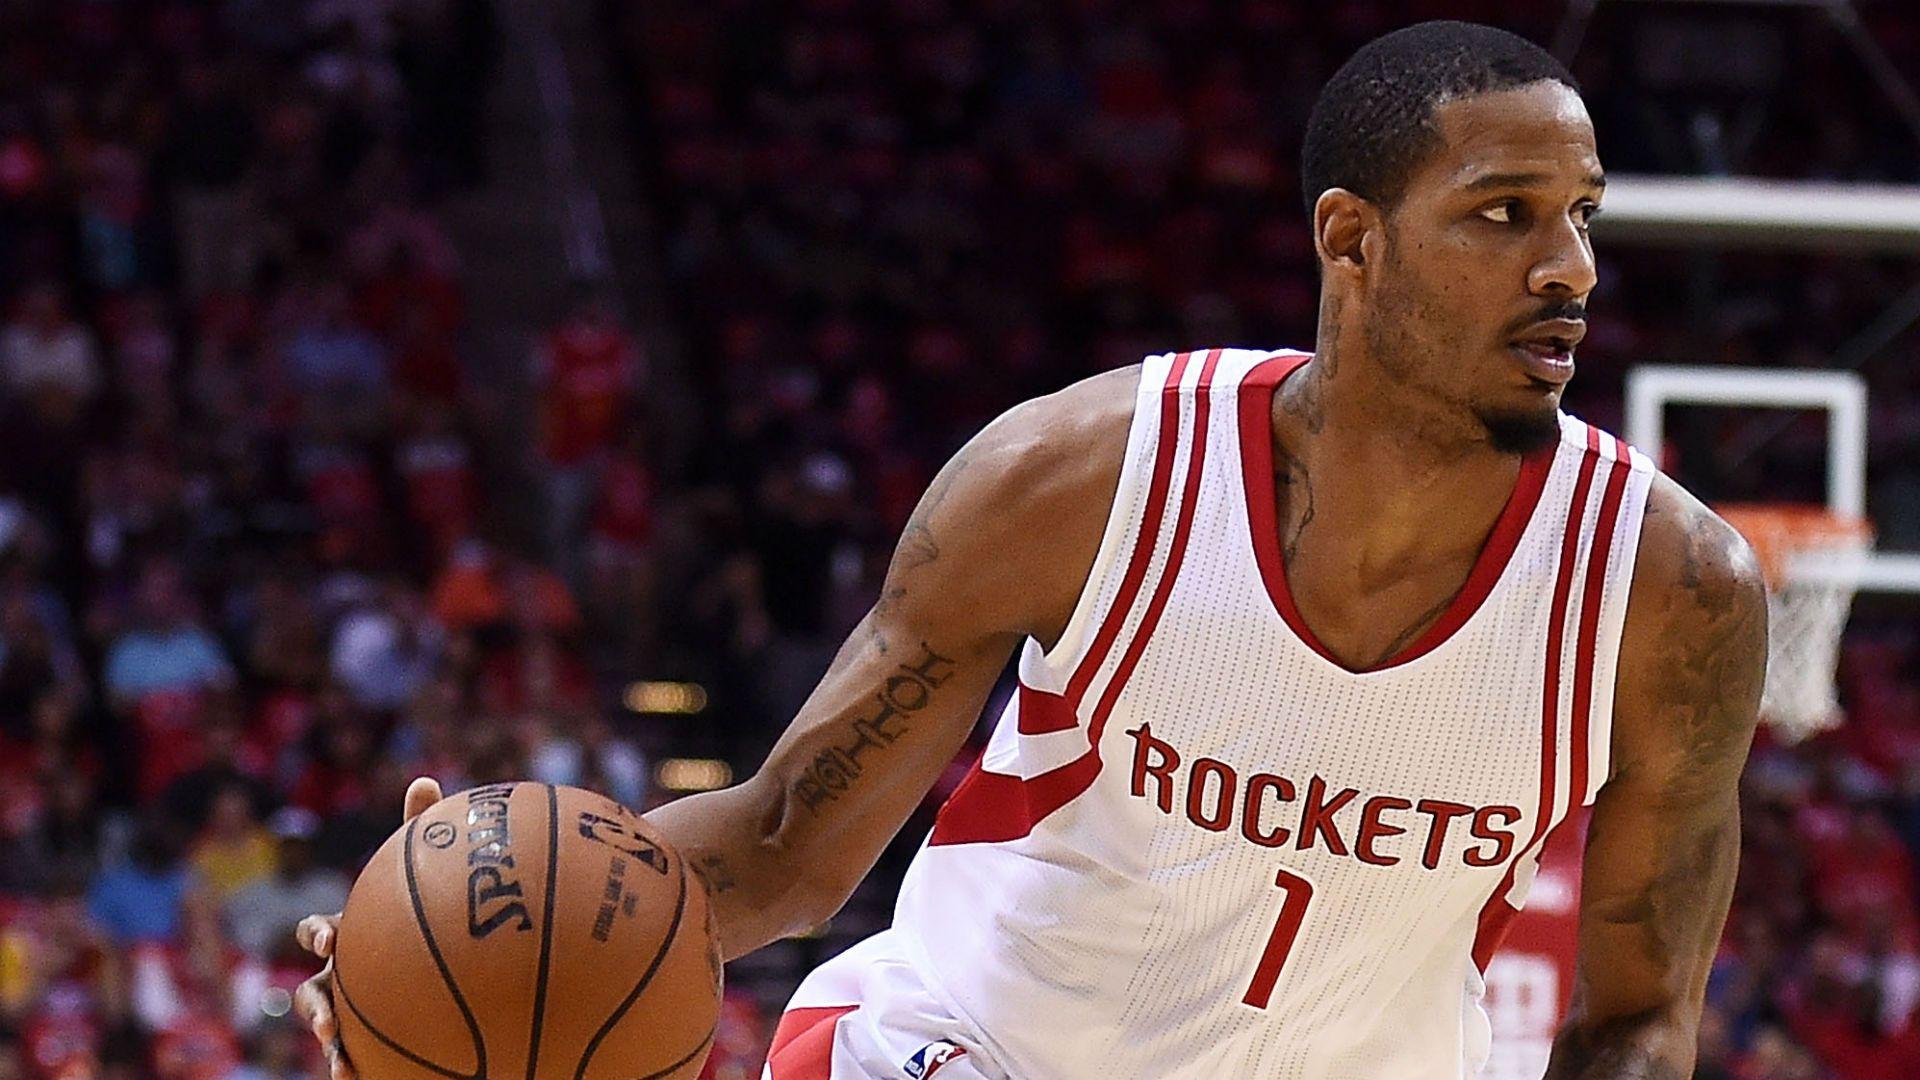 NBA Free Agency Rumors: Trevor Ariza Signs 1 Year Deal With Suns